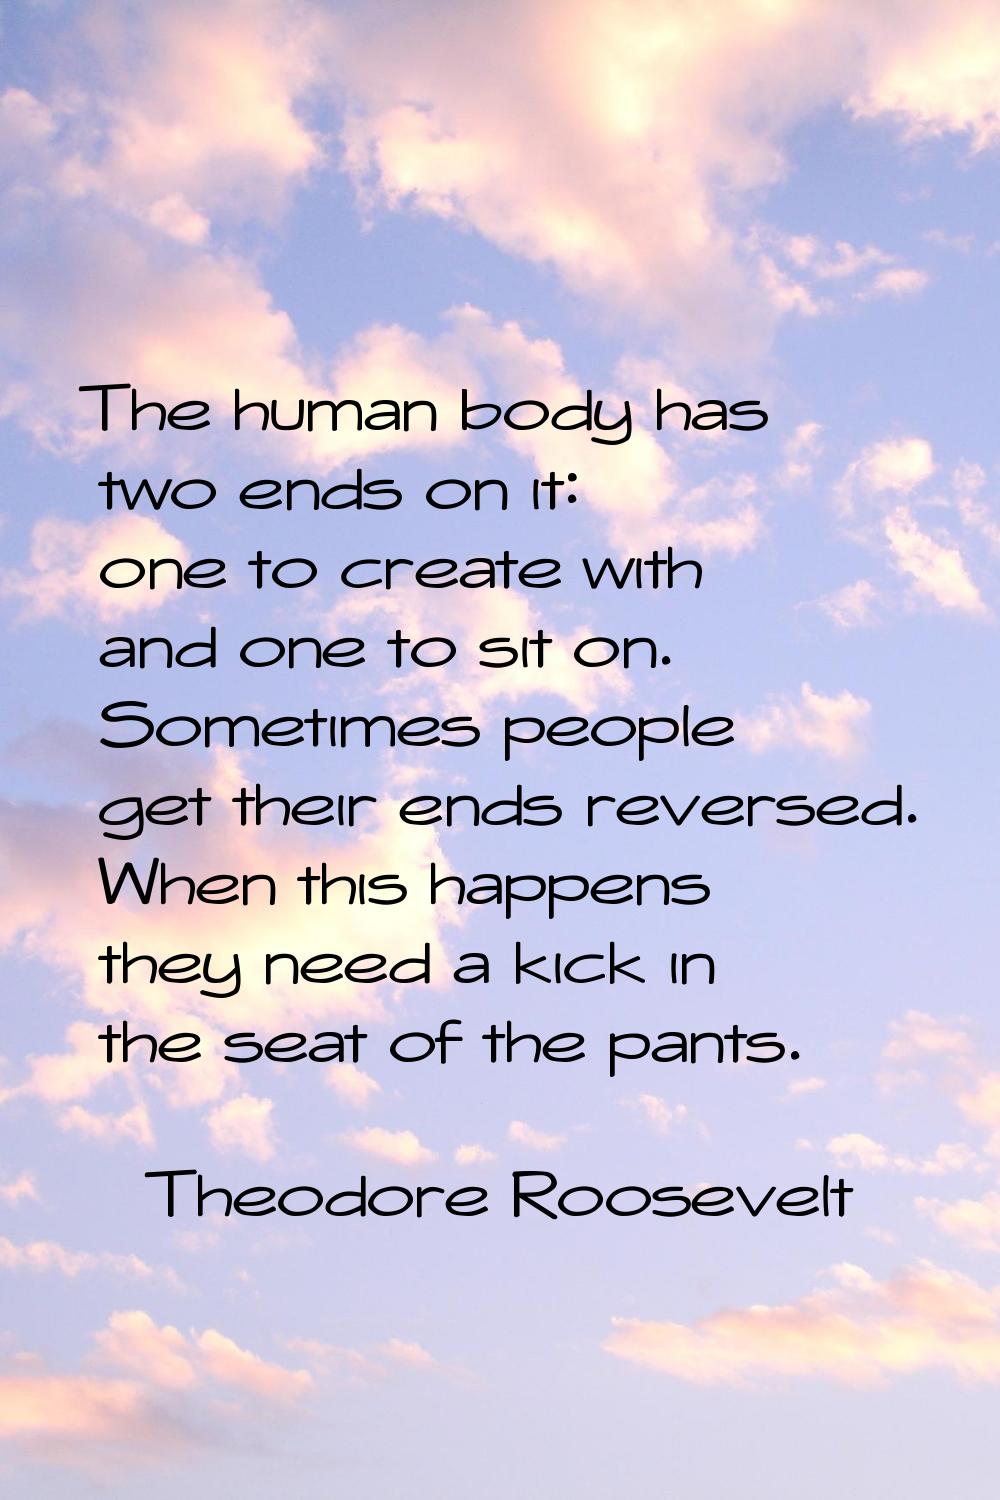 The human body has two ends on it: one to create with and one to sit on. Sometimes people get their